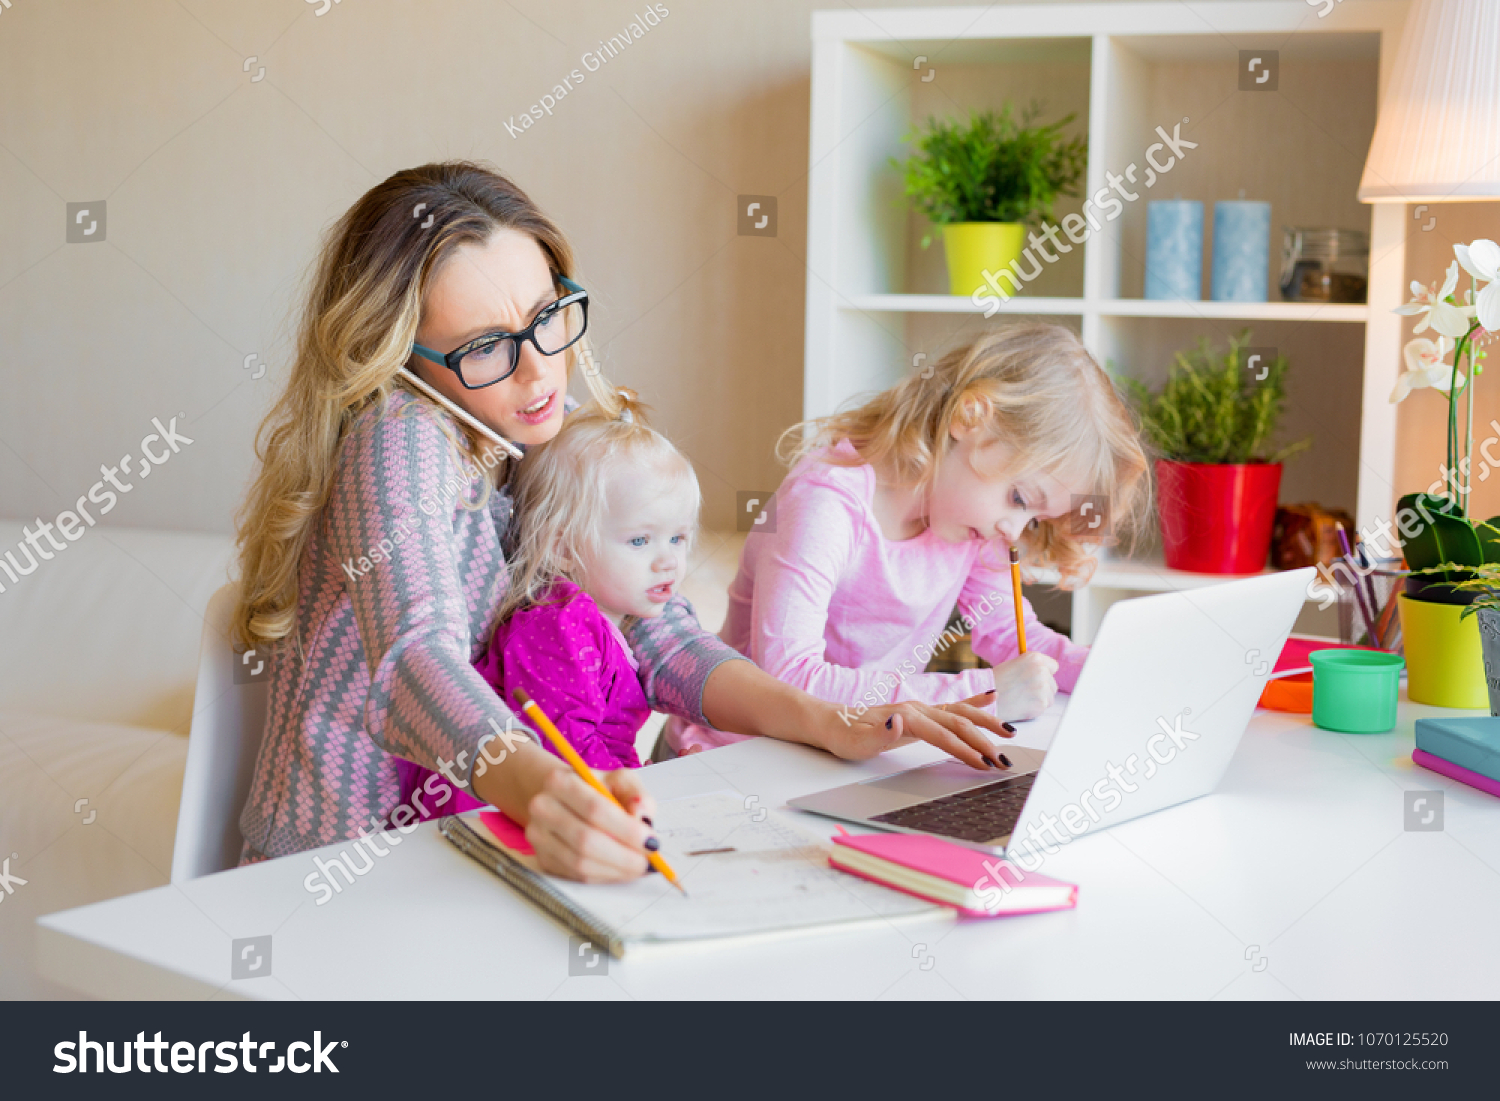 Busy woman trying to work while babysitting two kids #1070125520